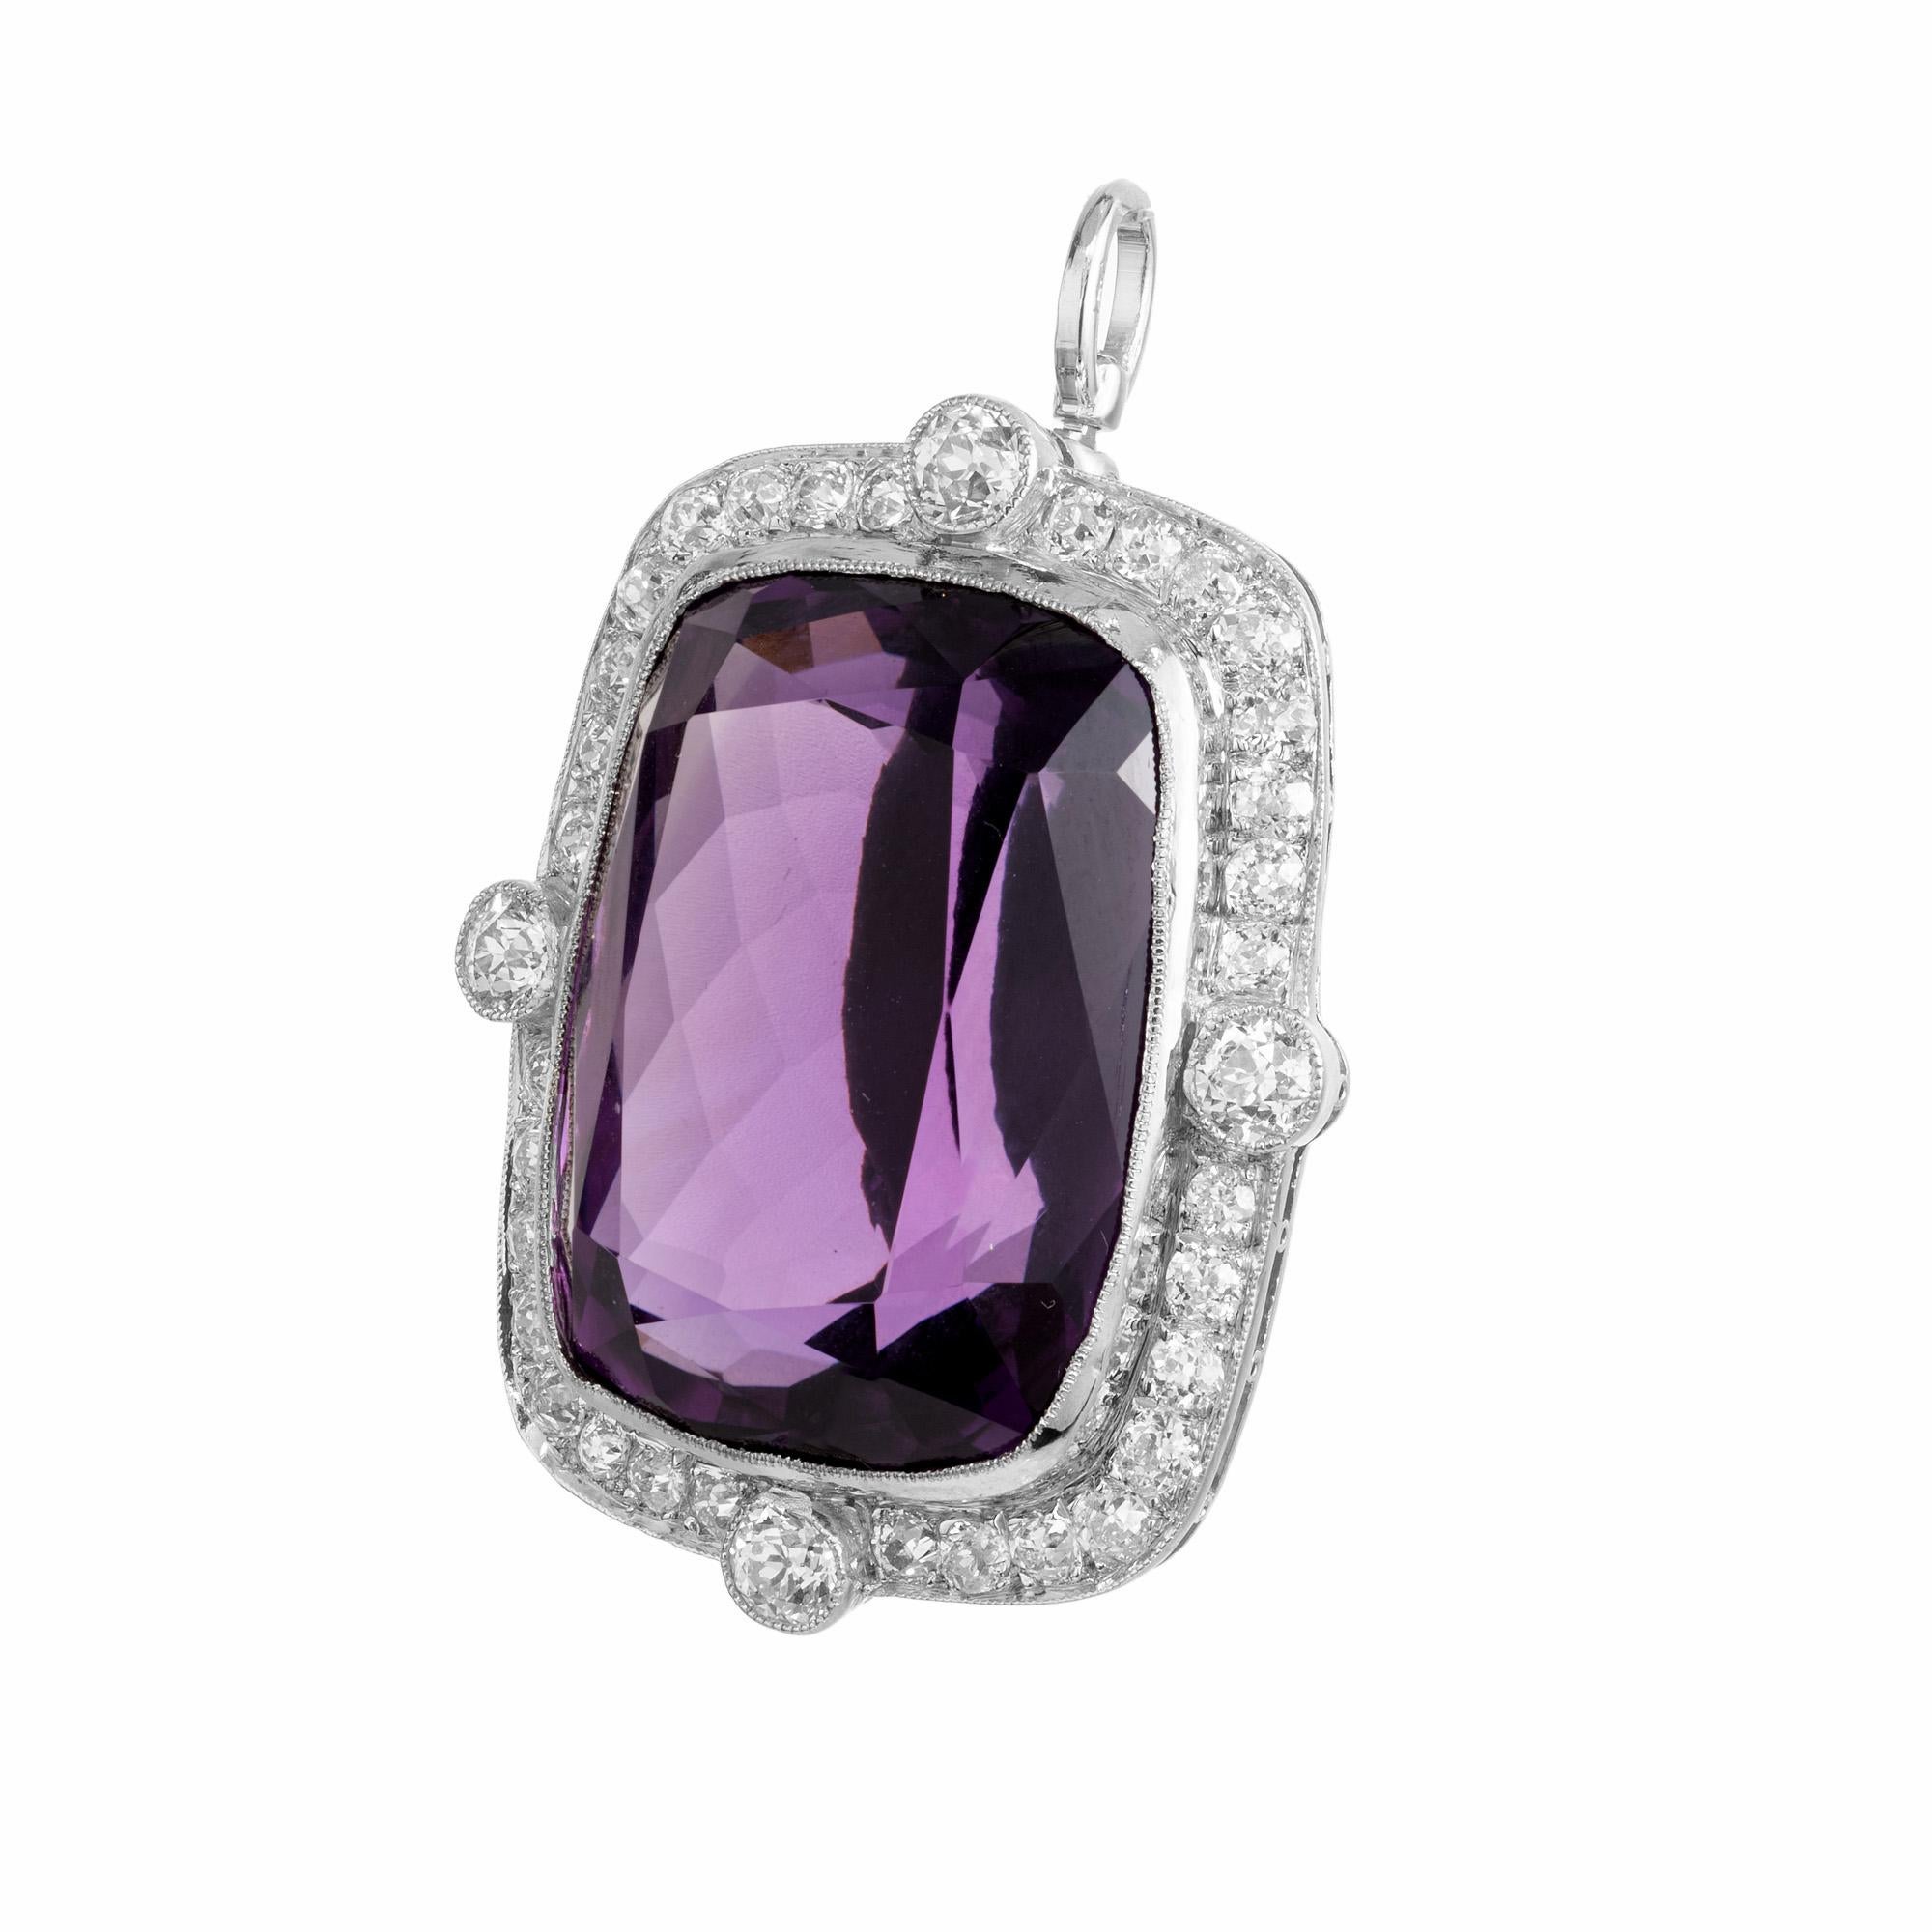 Vintage 1925 Art Deco amethyst and diamond brooch and pendant. This spectacular natural 29.54 carat a cushion cut Amethyst is mounted in a platinum frame with a halo of 36 old mine cut diamonds totaling 1.40cts. Crafted to perfection, this stunning